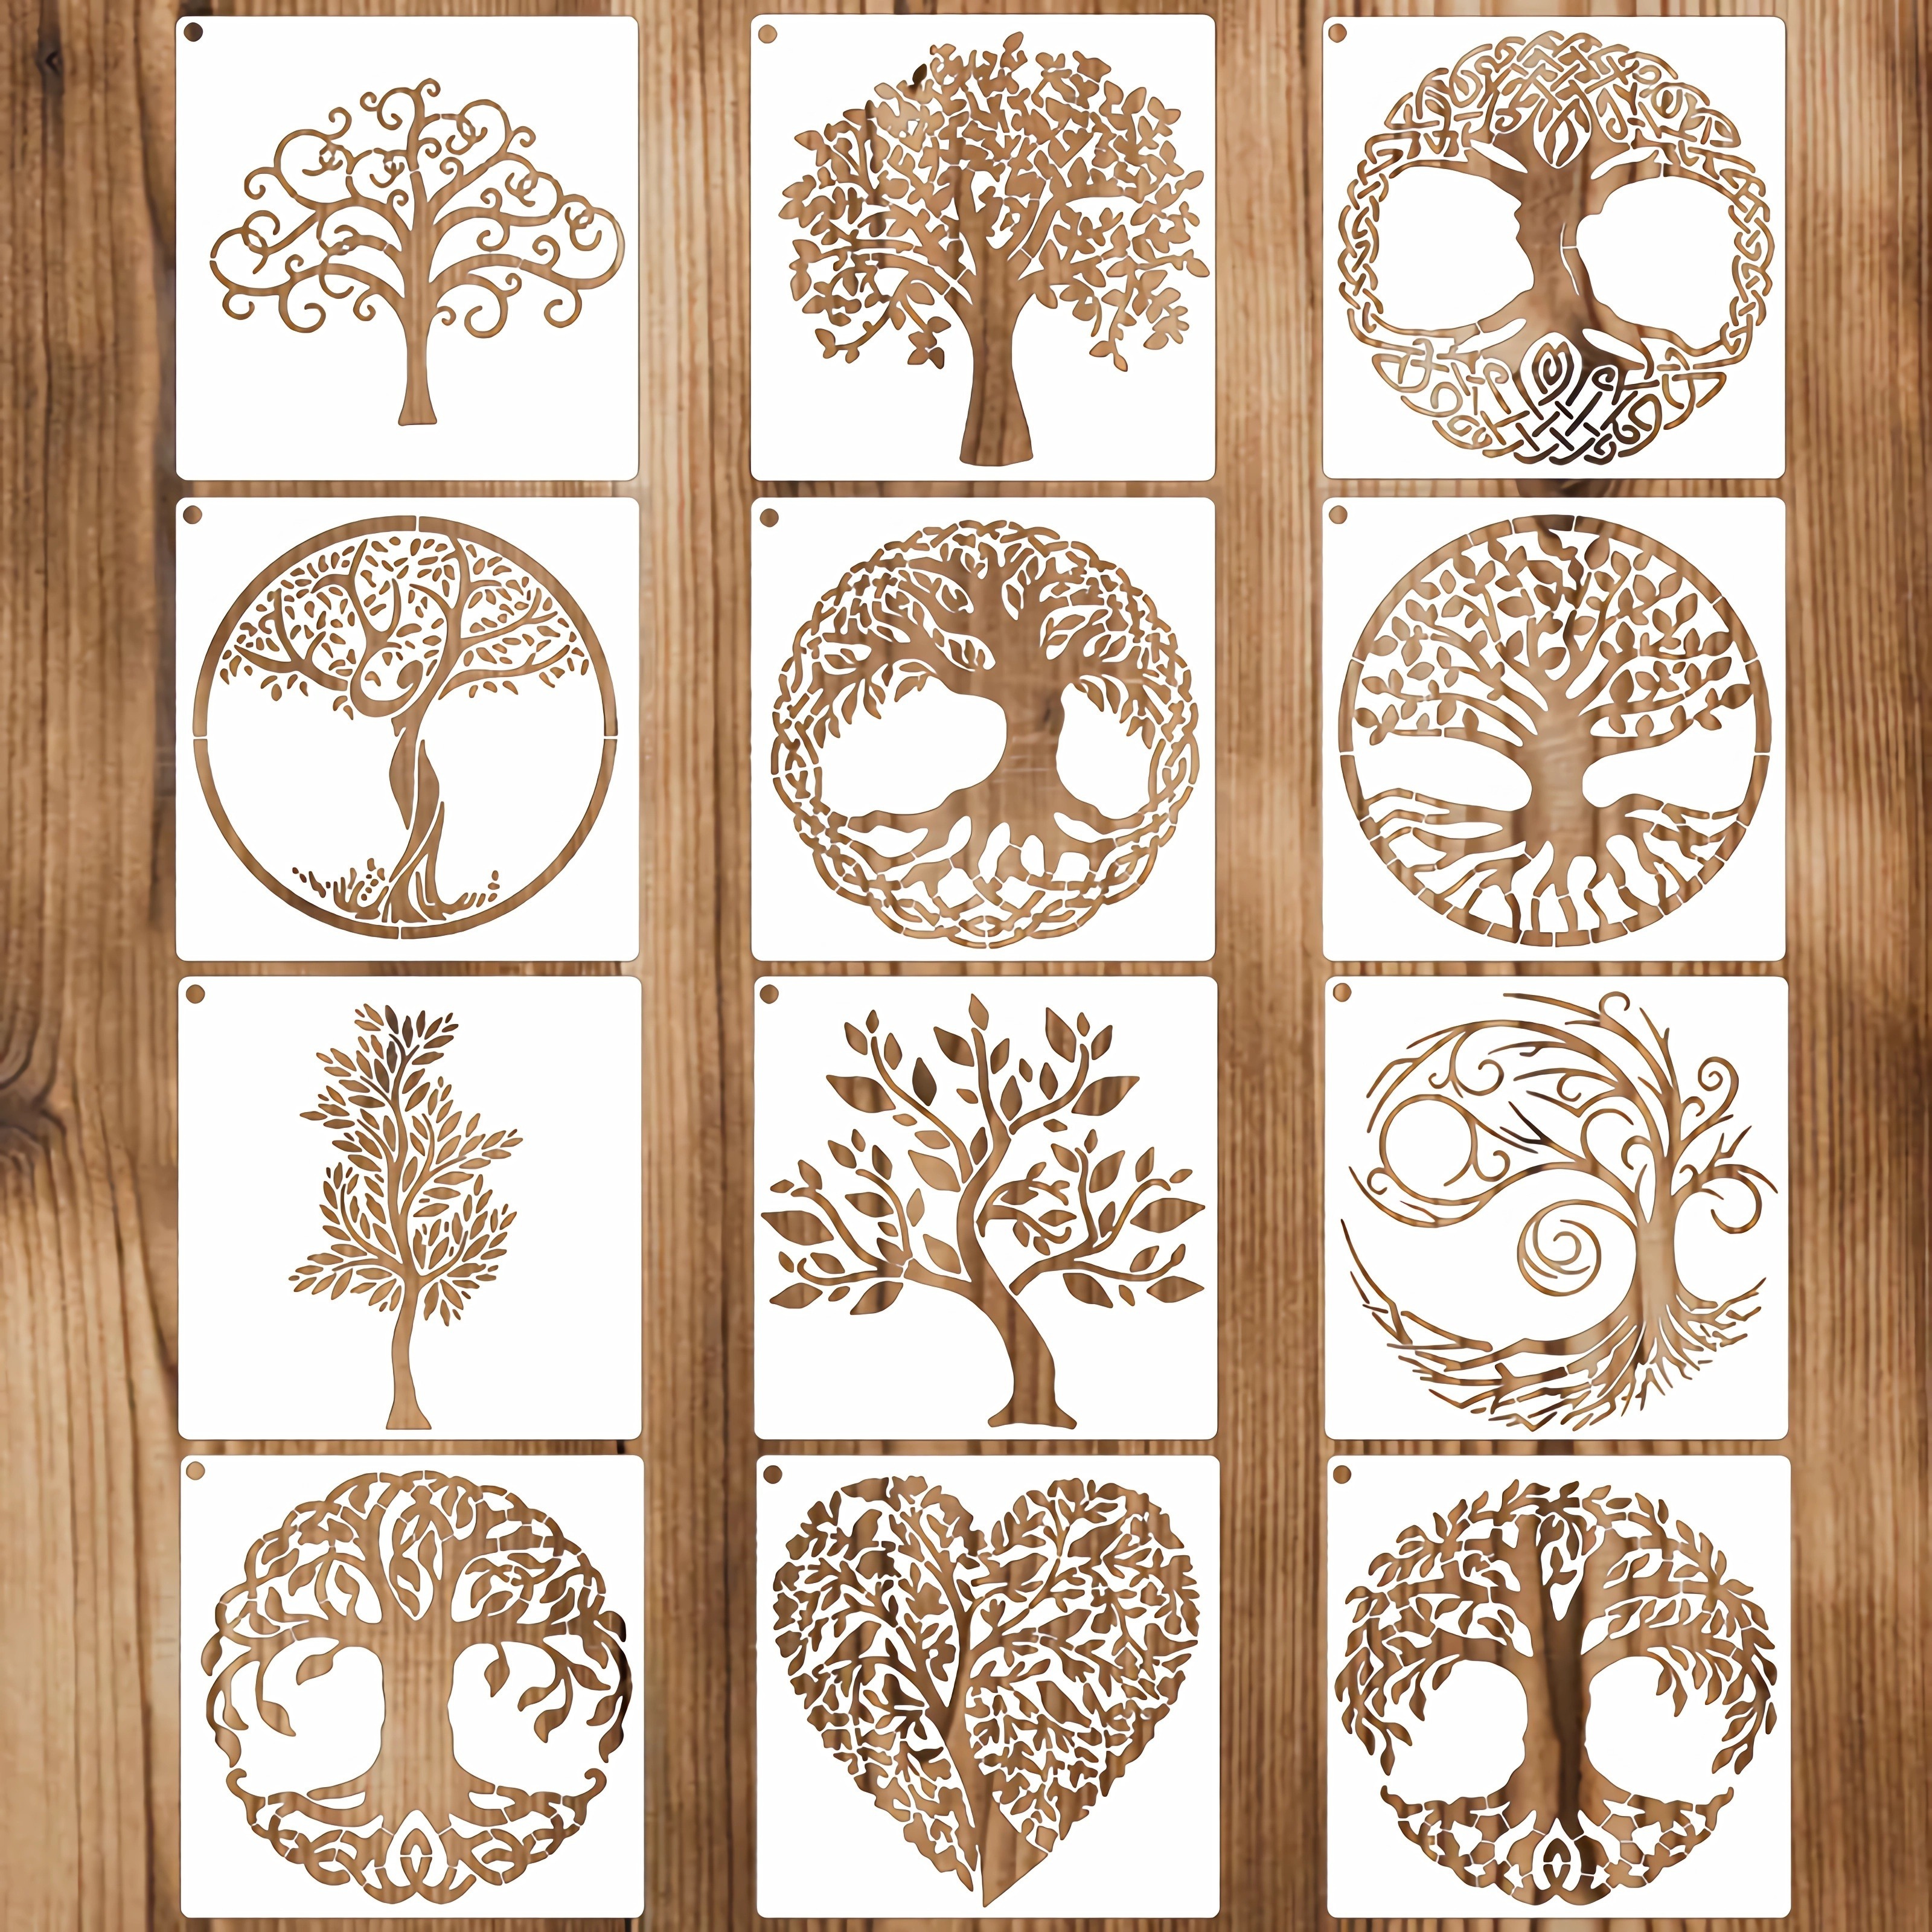 Explore Tree Stencils in the Many Forms They Can Take